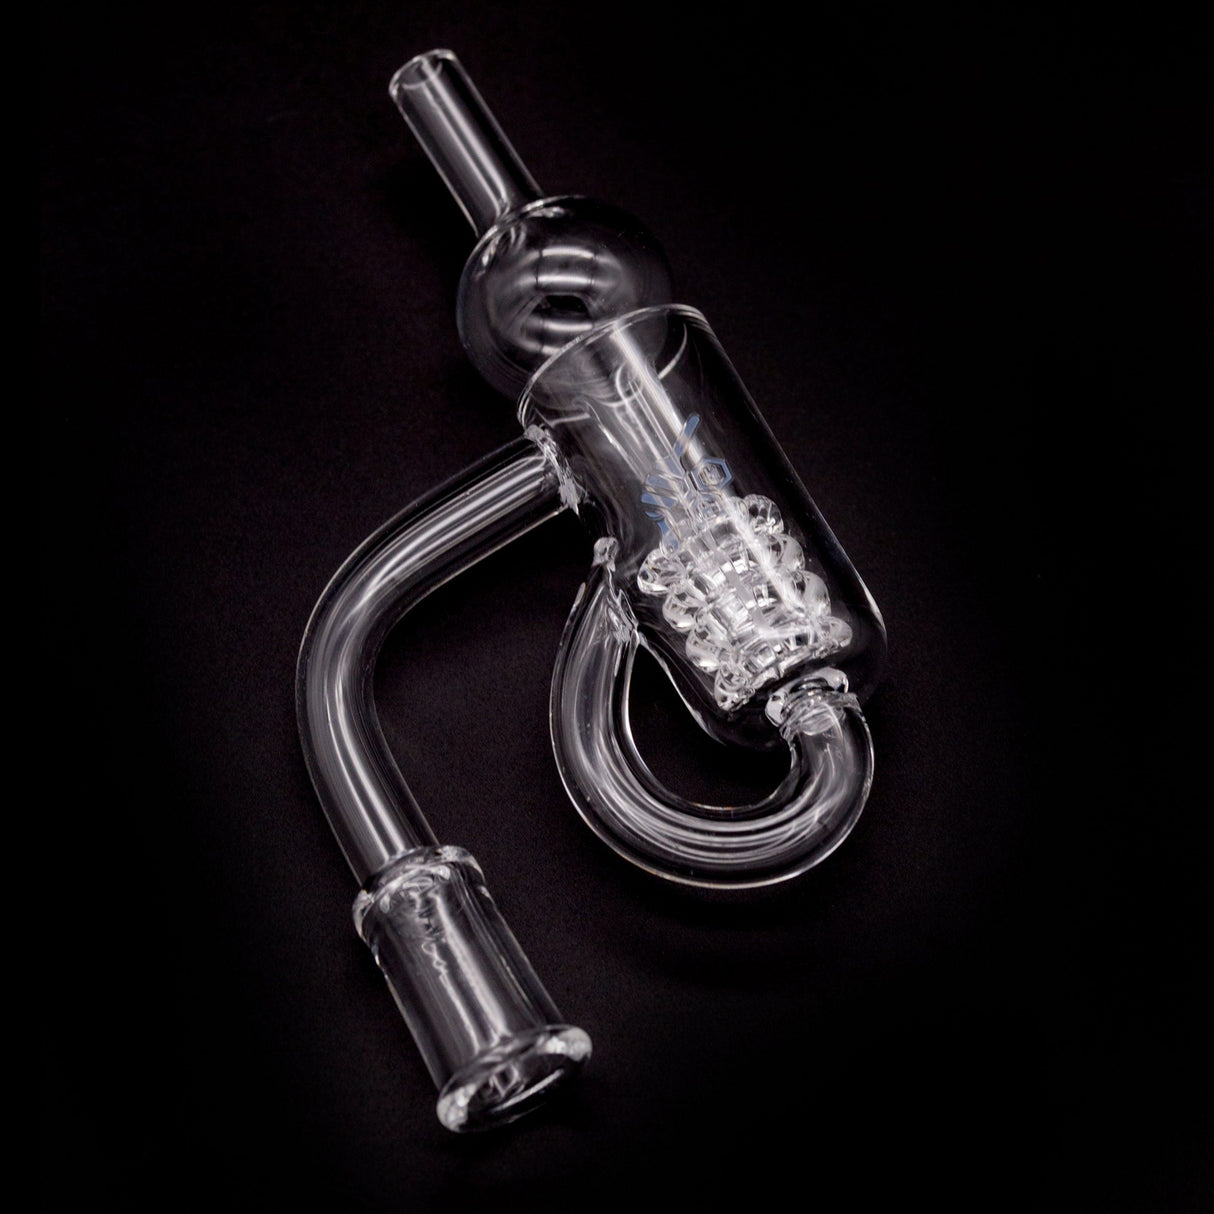 Honeybee Herb Quartz Banger Recycler for Dab Rigs, Clear 90 Degree Joint, Top View on Black